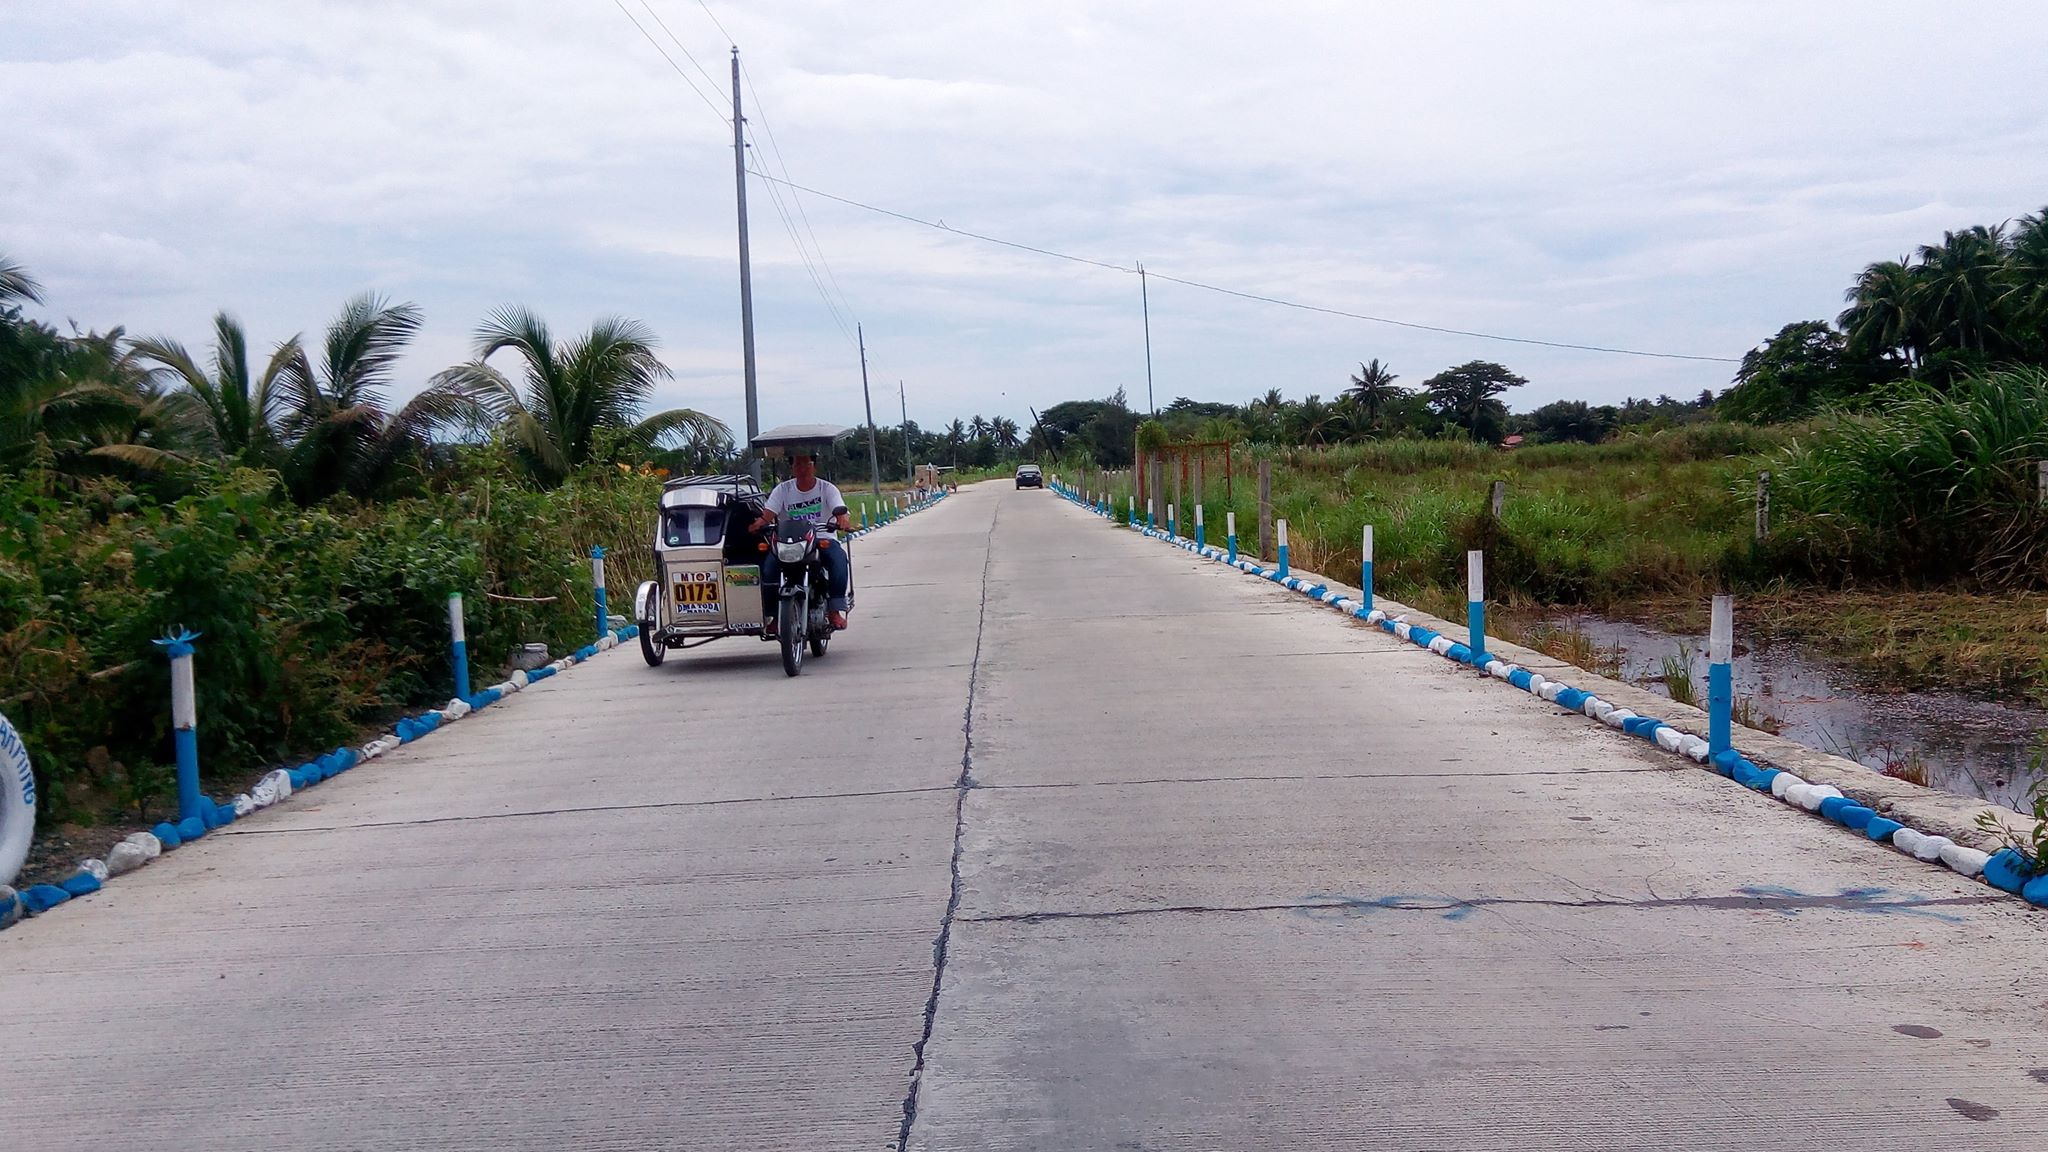 The completed FY 2018 AM Project Local Access Road in Brgy. Bangco Ramada